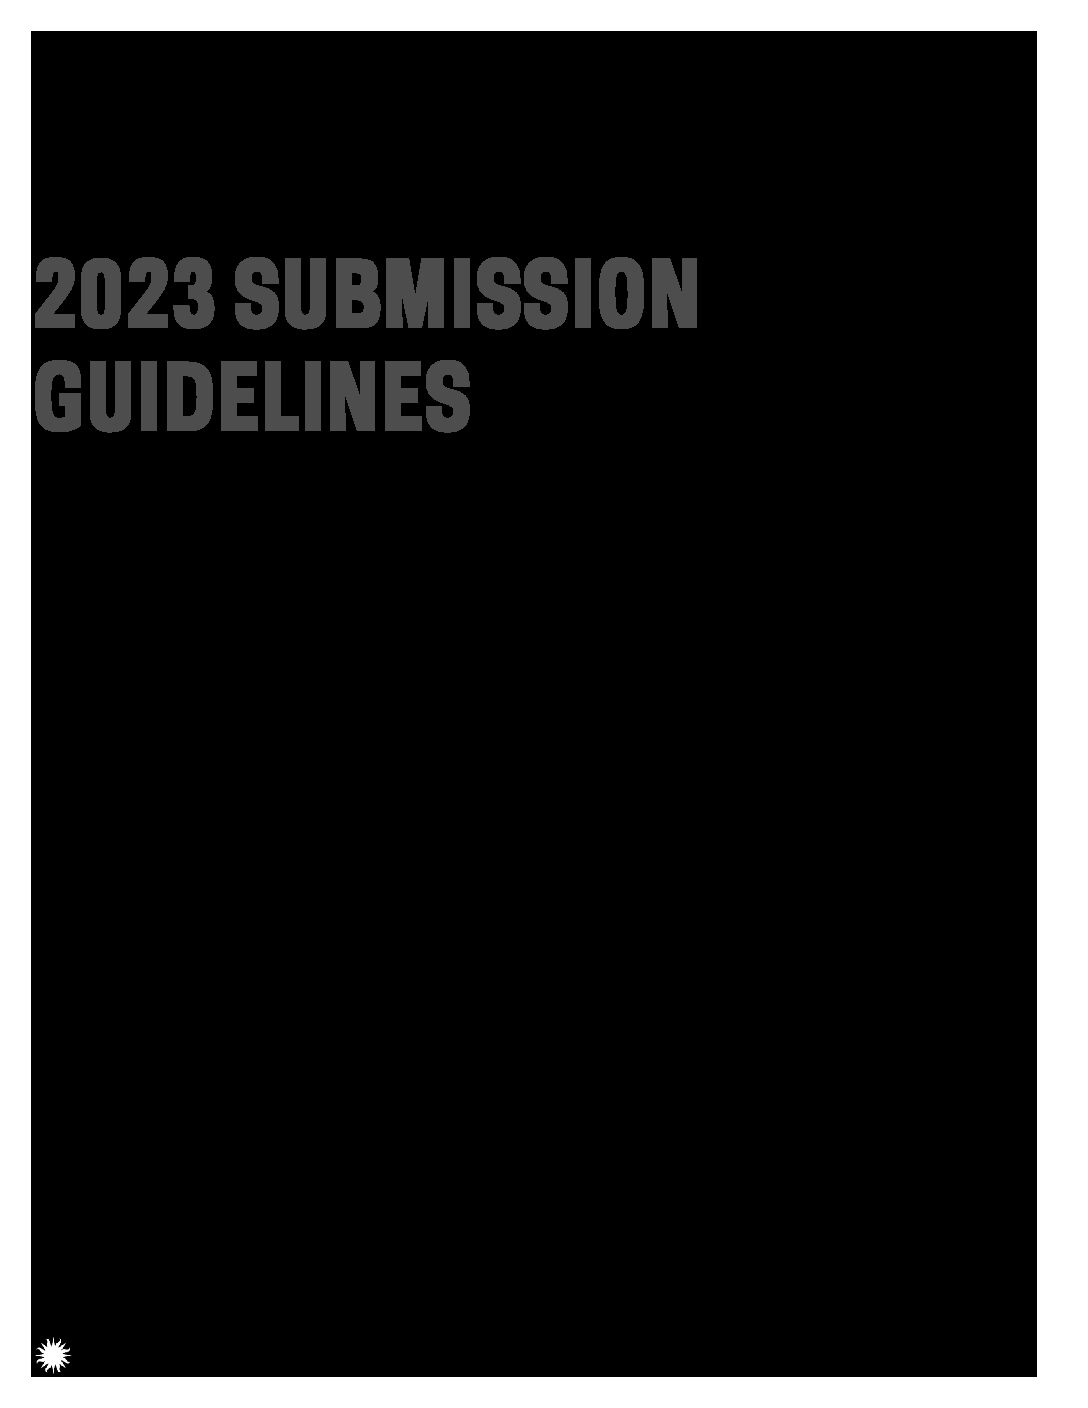 2023_NDA_Submission_Guidelines Cooper Hewitt, Smithsonian Design Museum